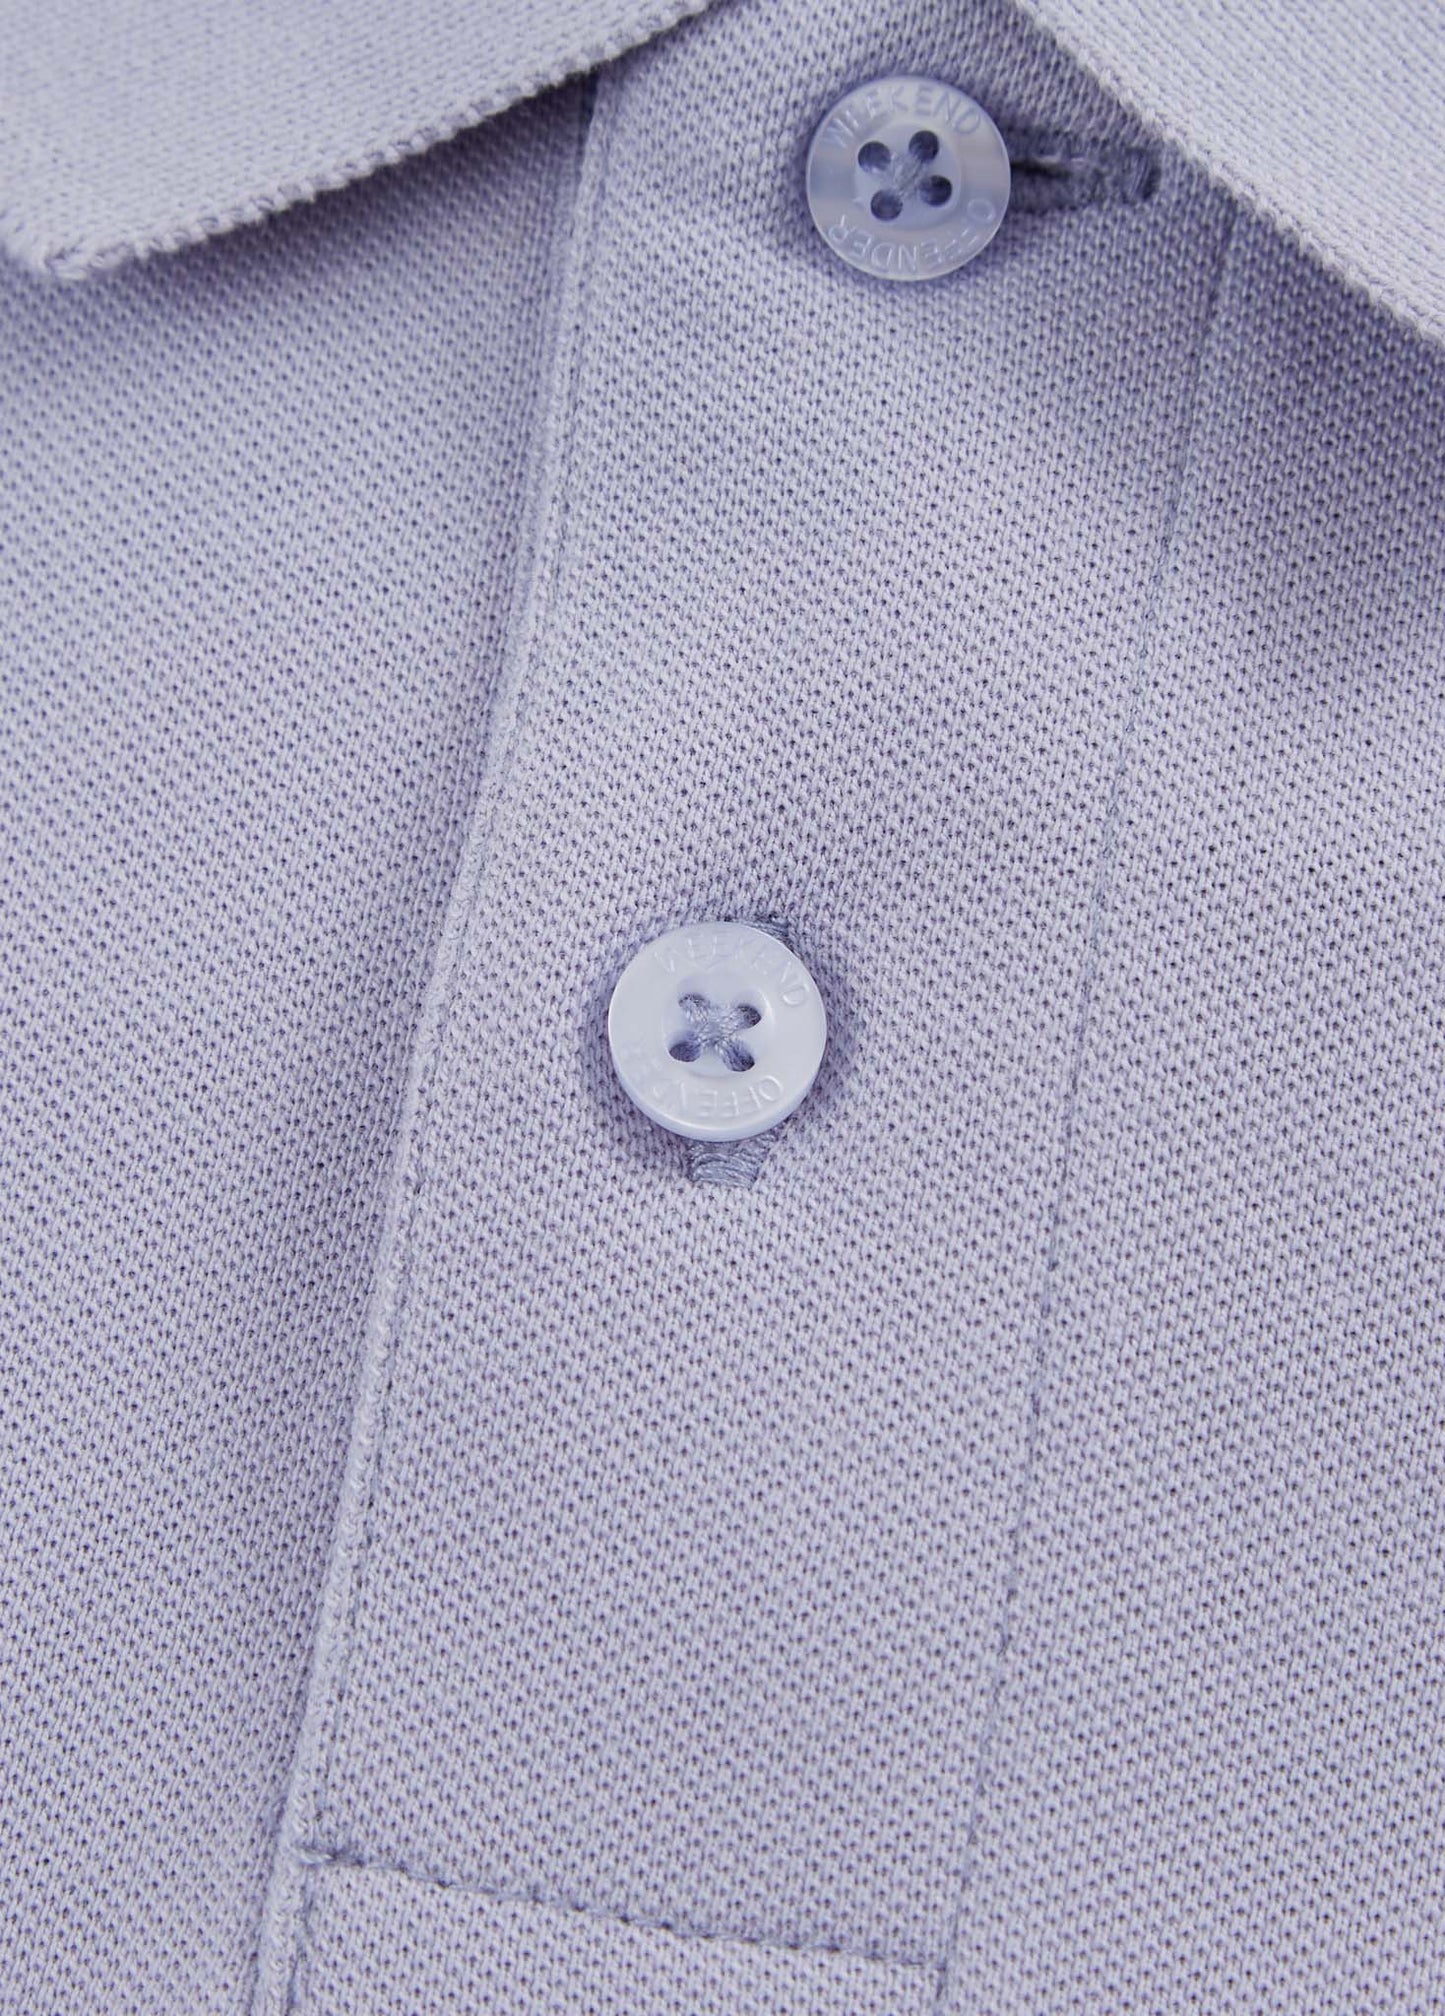 Weekend Offender Polo's  Caneiros - lavender 